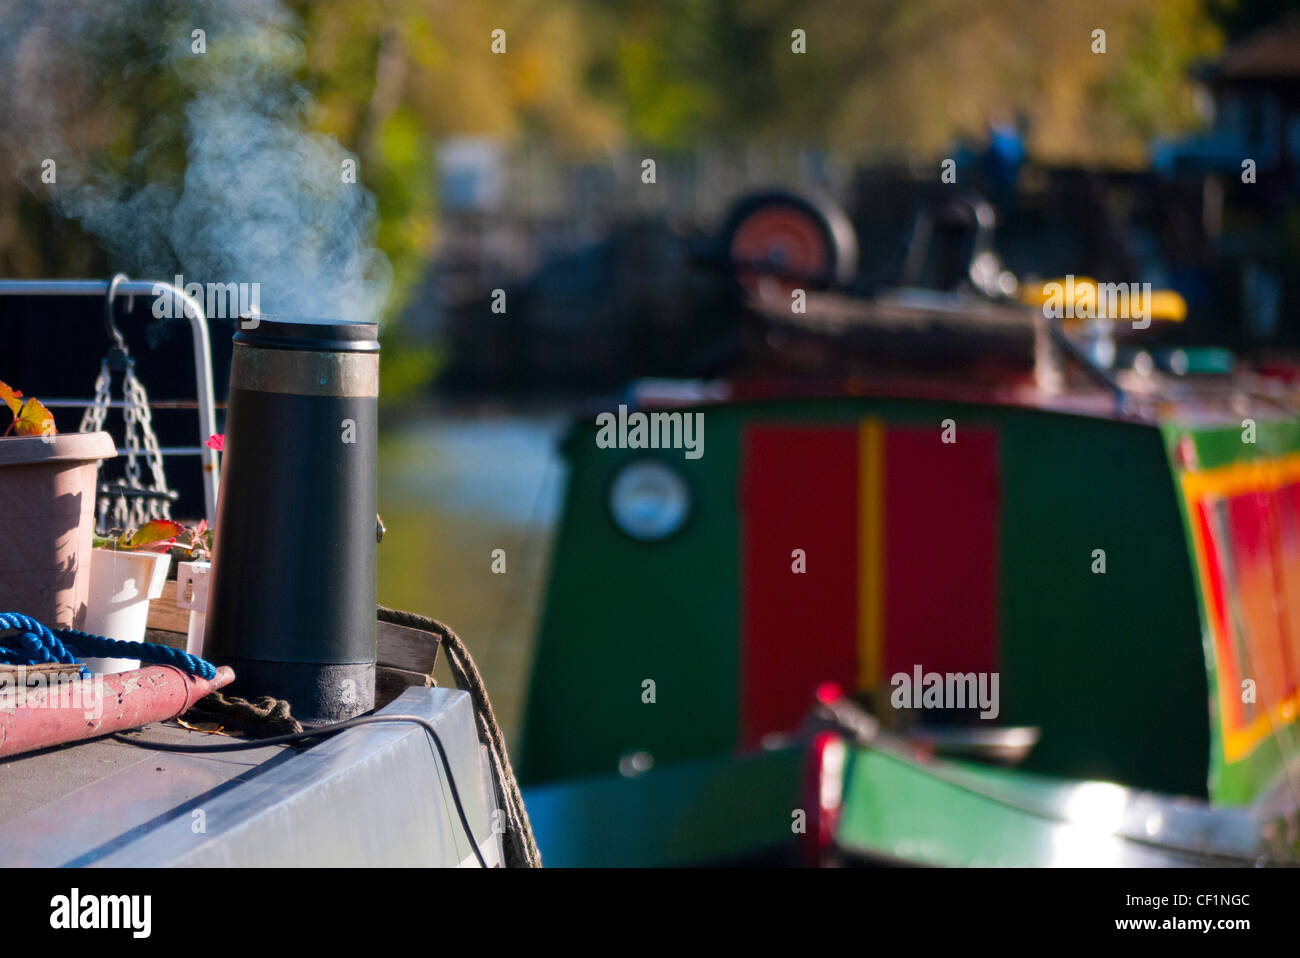 Smoking chimney on a houseboat moored on the River Thames. Stock Photo